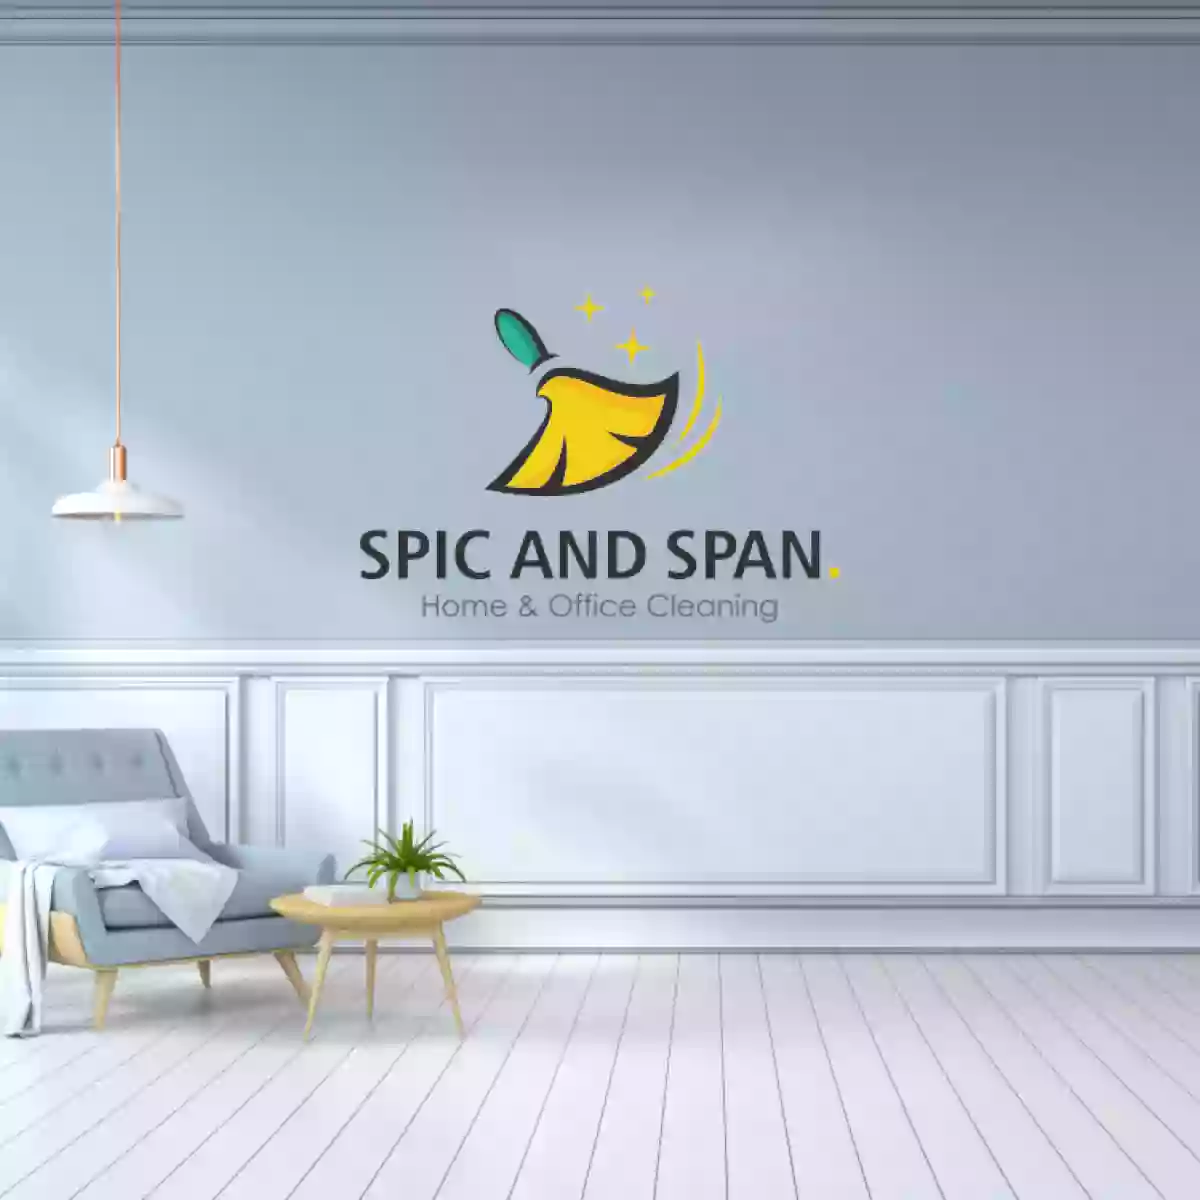 SPIC AND SPAN. Home & Office Cleaning (Warsaw)